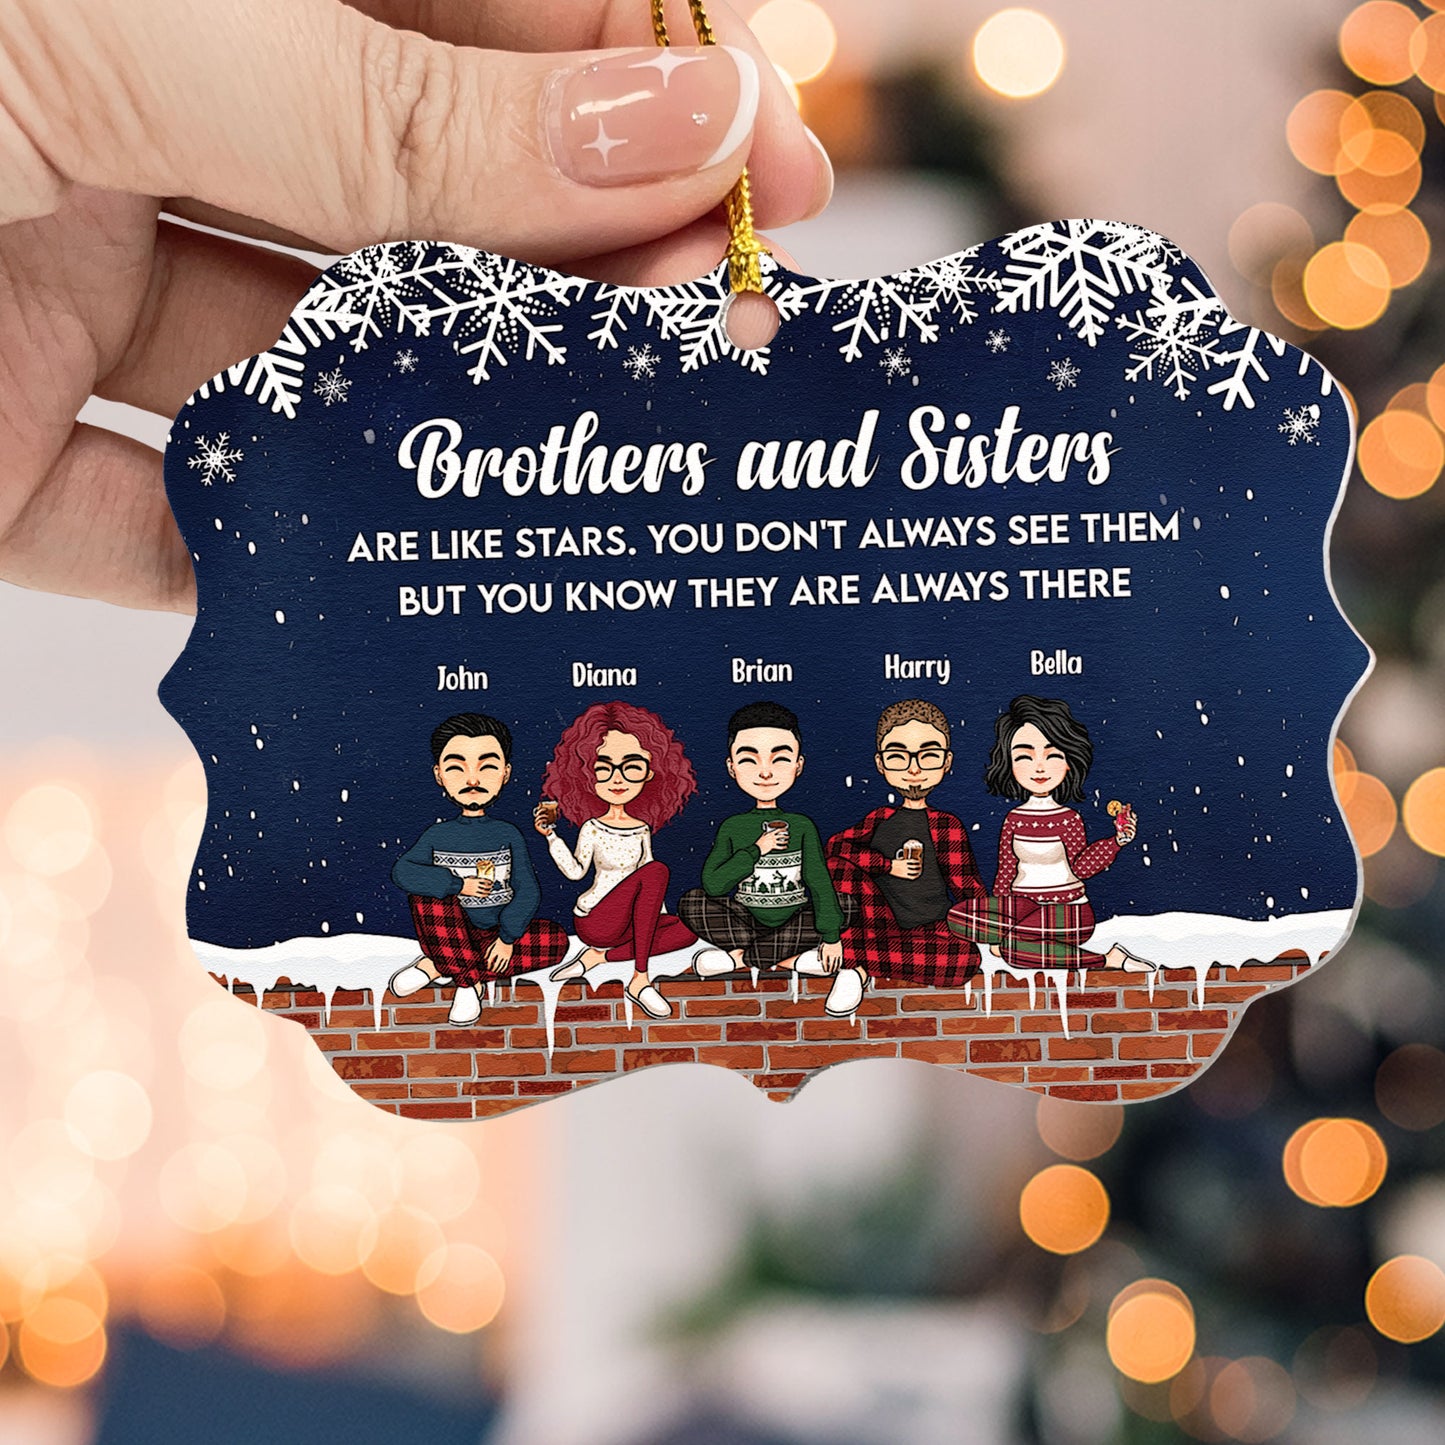 Siblings, Good Friends Are Like Stars - Personalized Aluminum/Wooden Ornament - Christmas Gift For Siblings, Friends